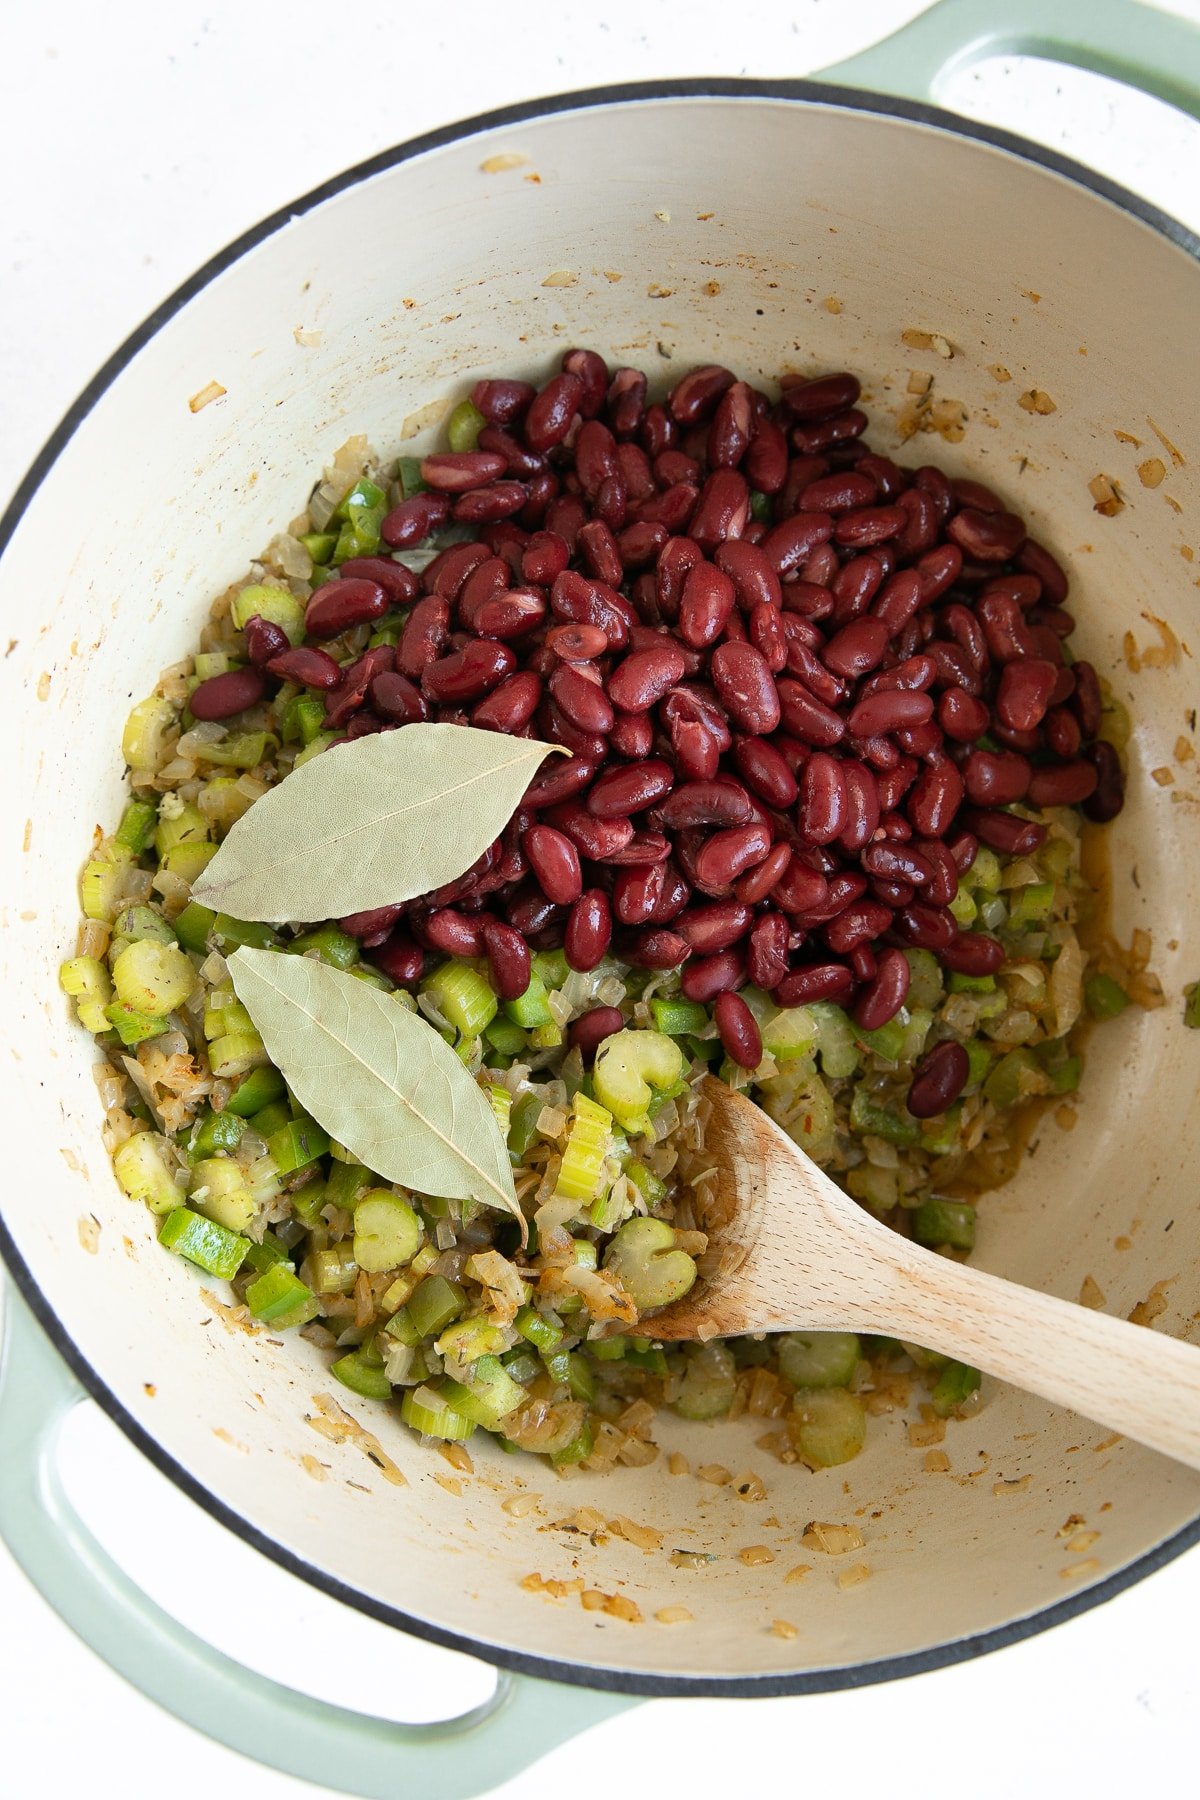 Large Dutch oven filled with cooked onions, celery, and green bell pepper with garlic and topped with red kidney beans and two bay leaves.